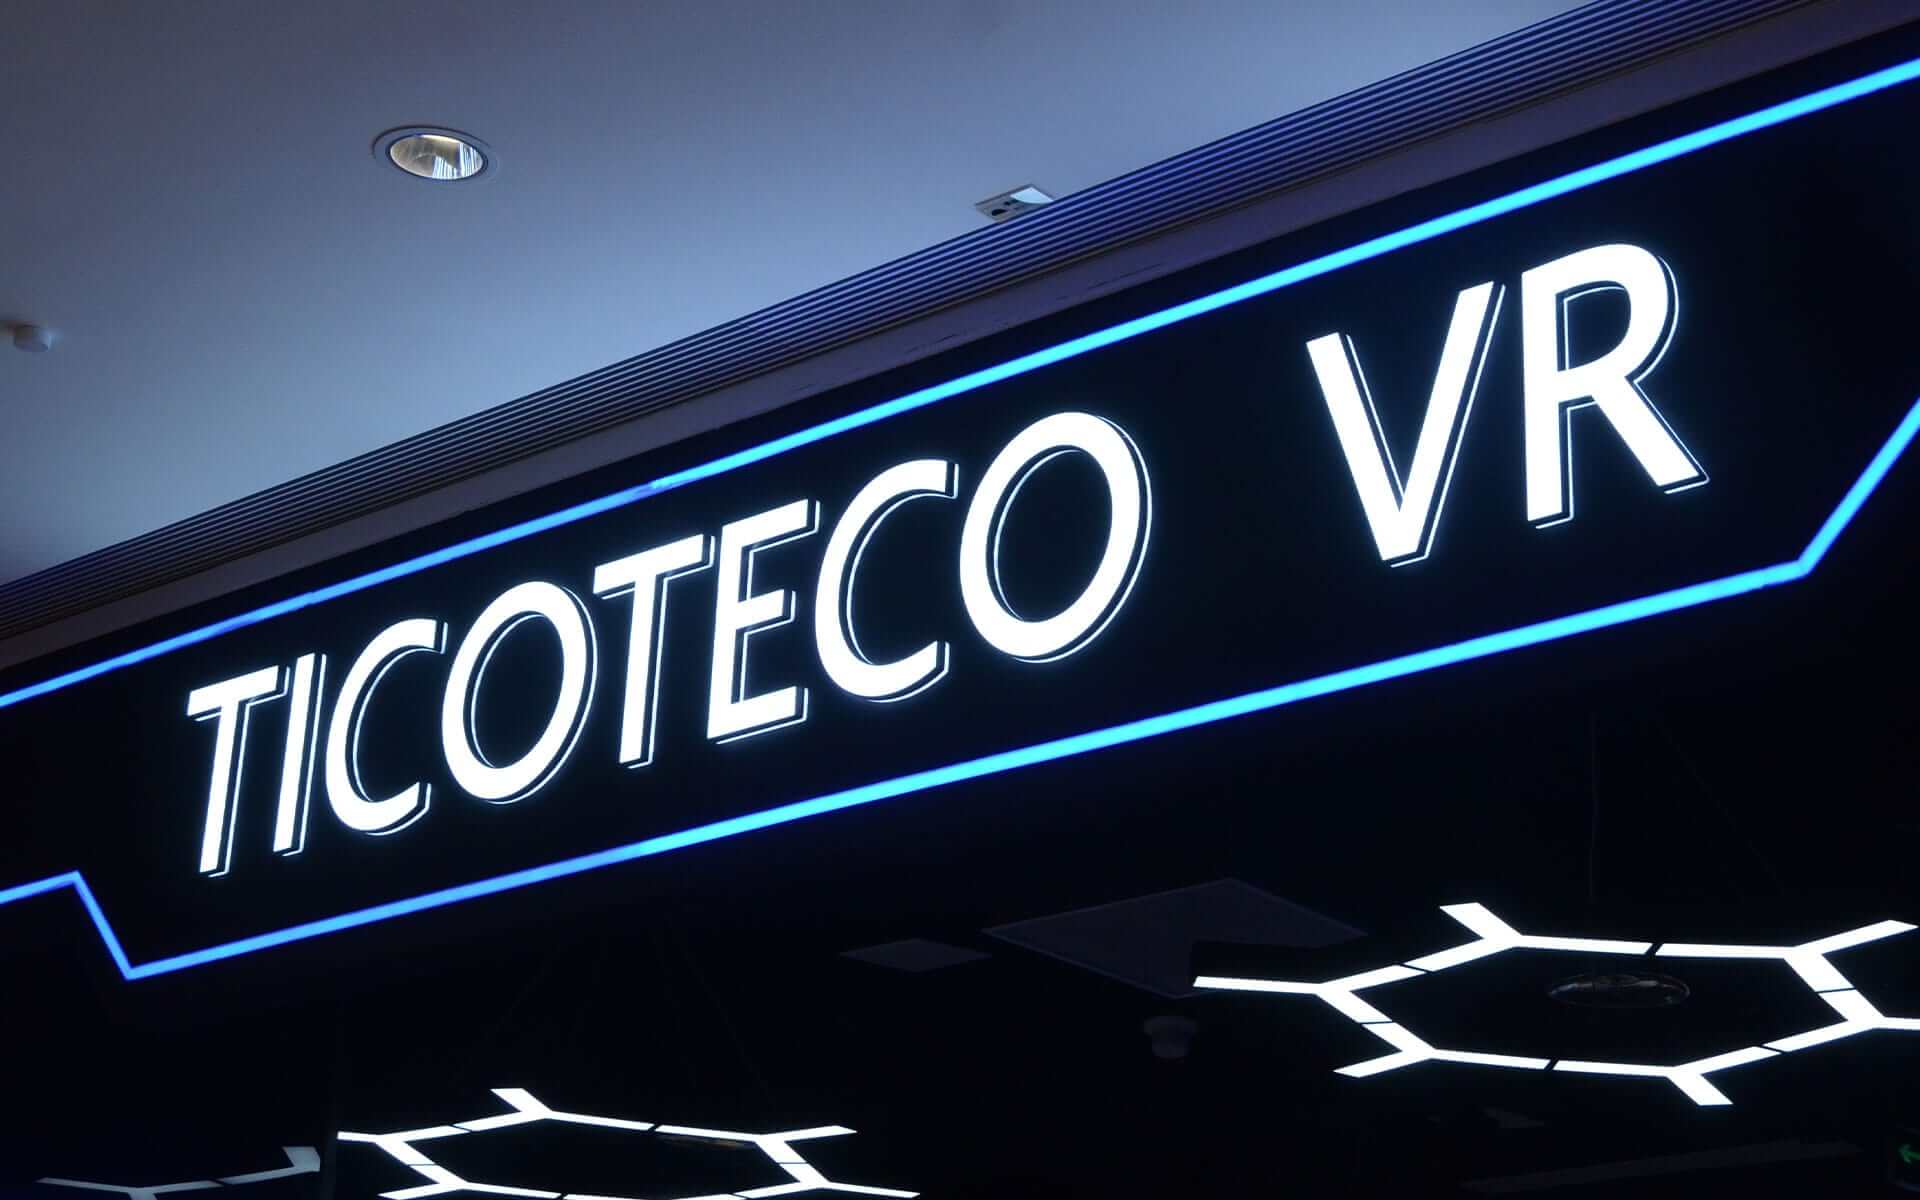 Face and Back-lit Acrylic Channel Letters for Ticoteco VR